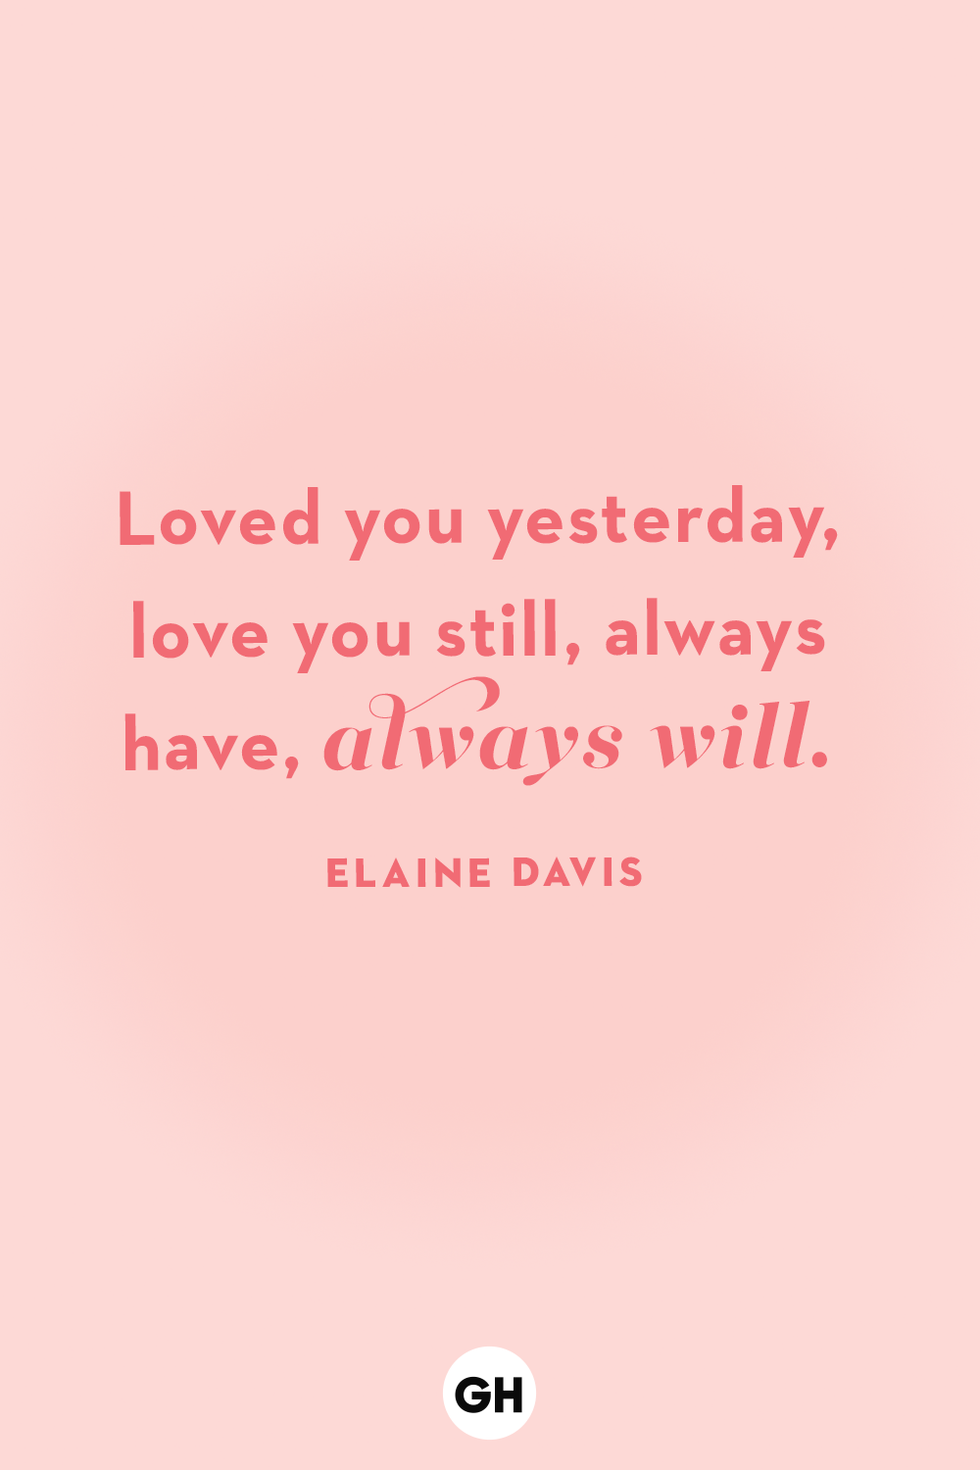 60 Best Love Quotes - Short 'I Love You' Quotes